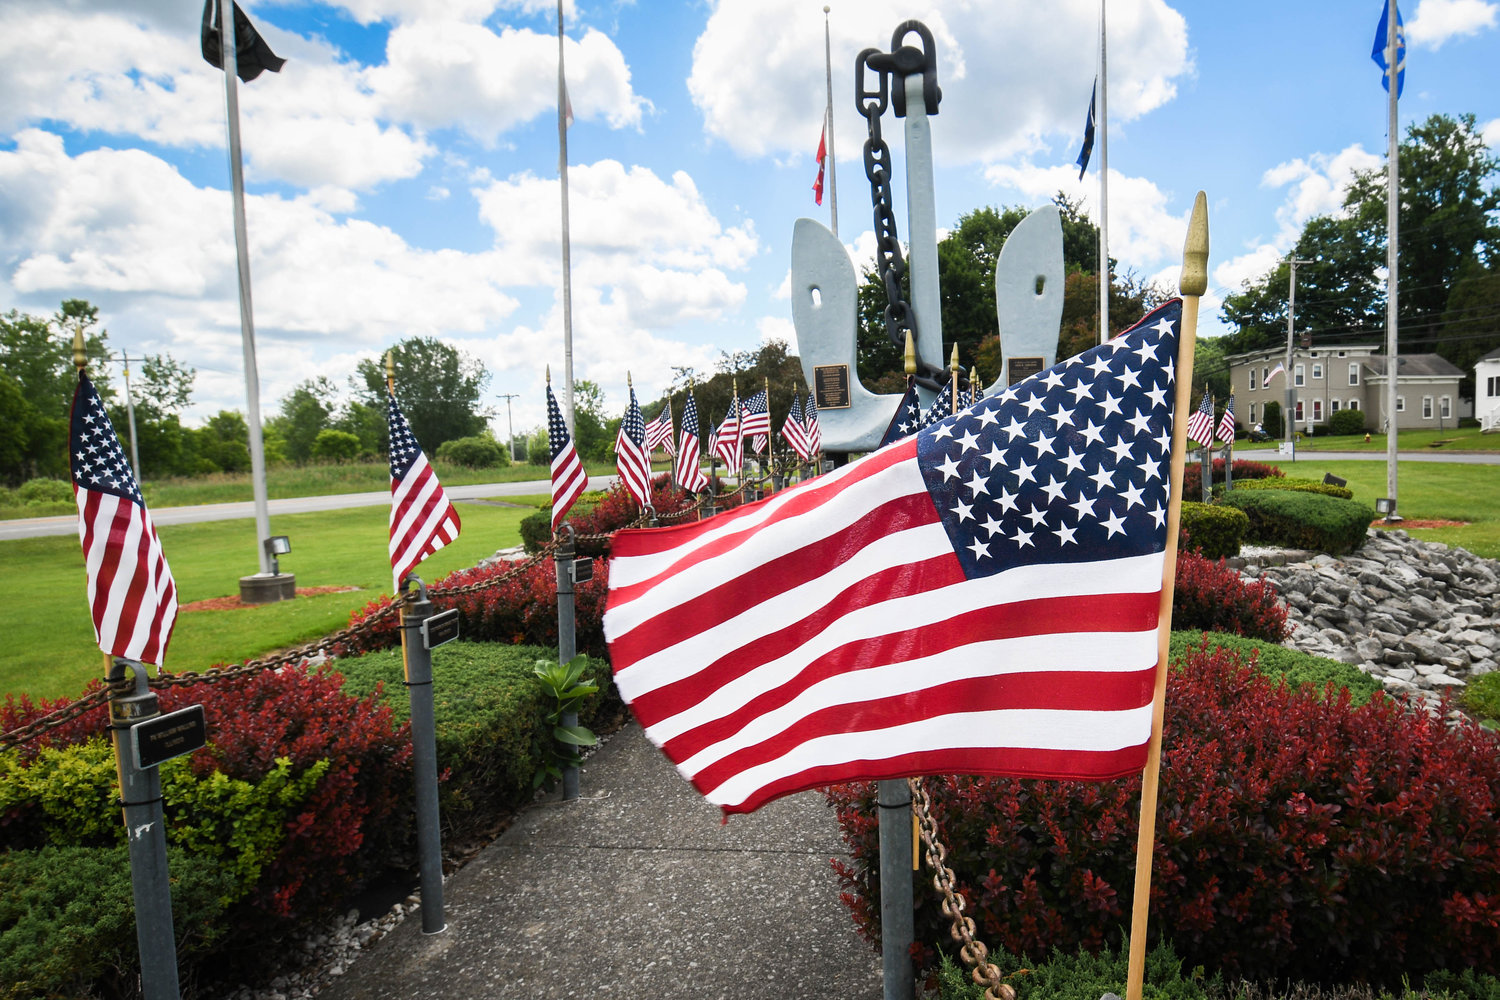 PATRIOTISM ON DISPLAY — American flags decorate the USS Oriskany Anchor Memorial in Trinkaus Park in the village of Oriskany. Today is Flag Day, which commemorates the adoption of the U.S. flag on June 14, 1777, by resolution of the Second Continental Congress.